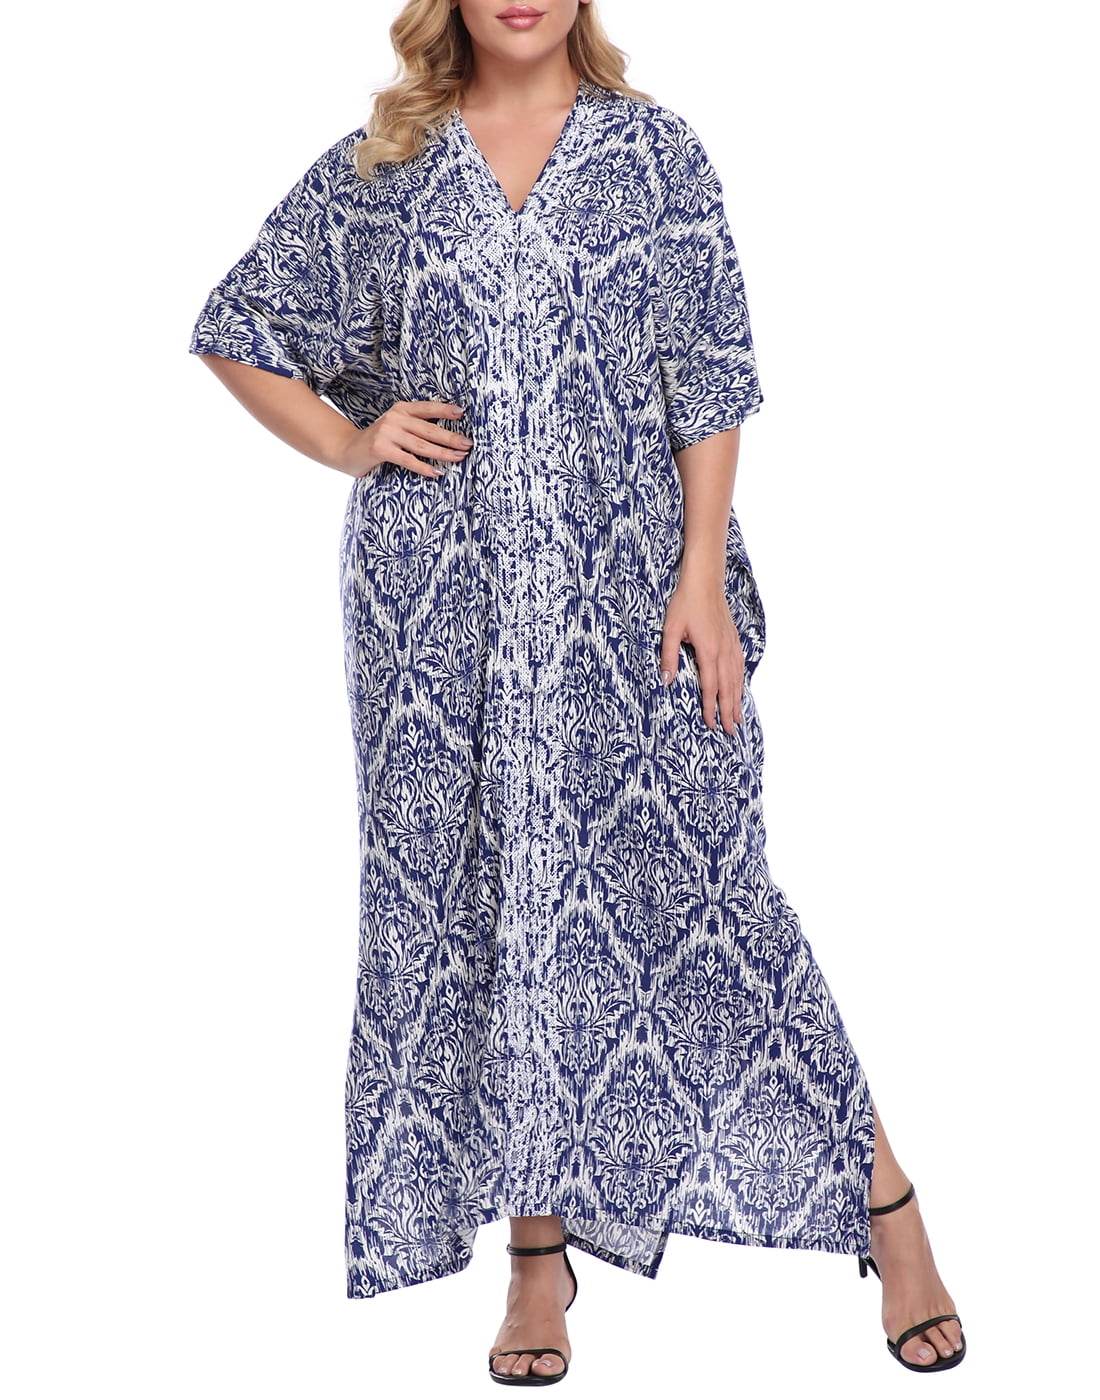 Ladies Kaftan/Poncho Beach wear one Size Tunic Top fits Large Plus Size Purple Abstract Pattern